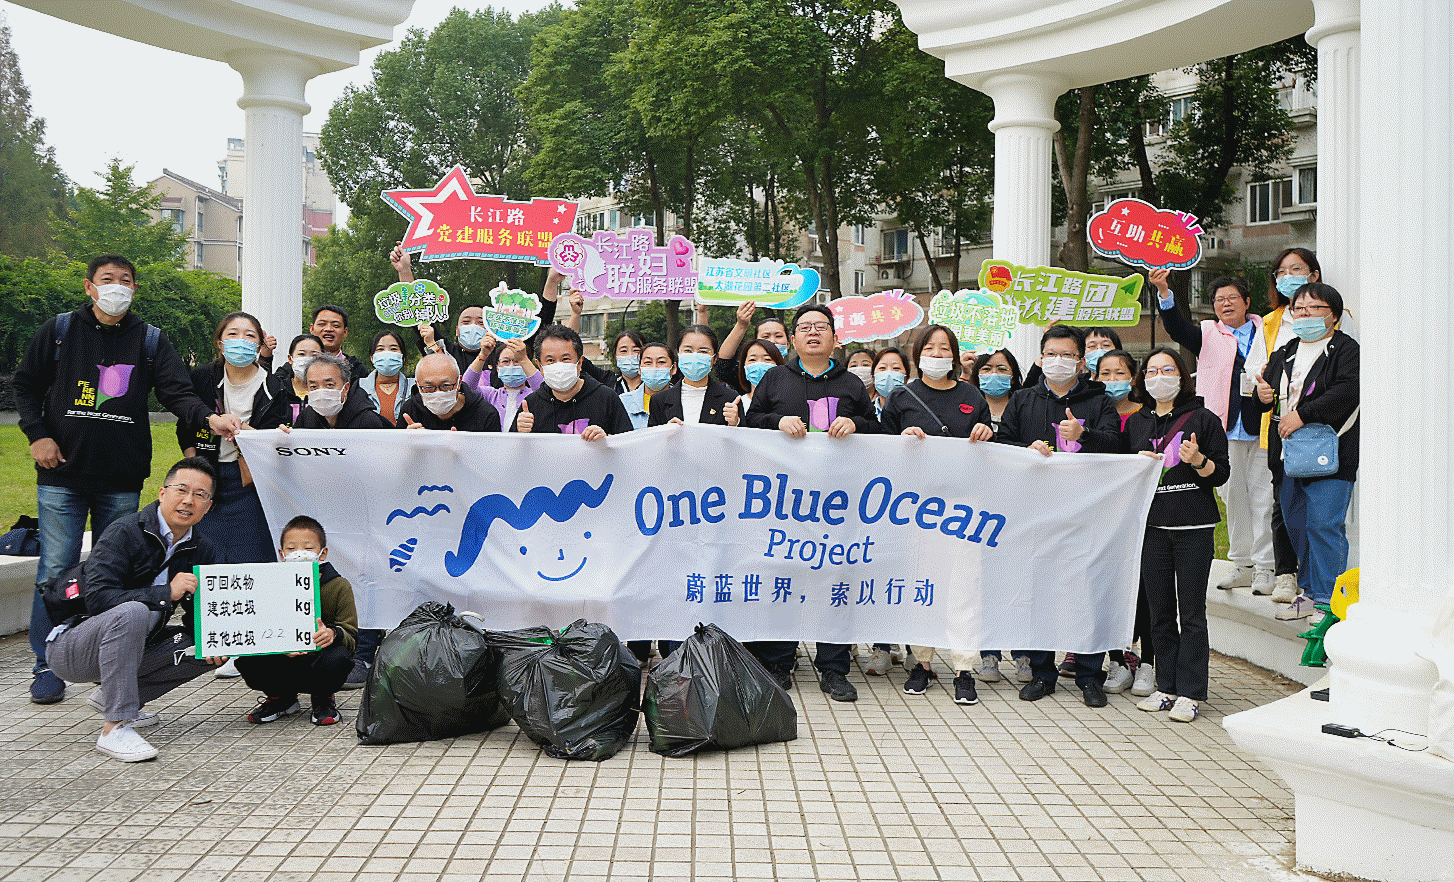 Photograph showing employees of Wuxi site, China participating in community cleanup activity